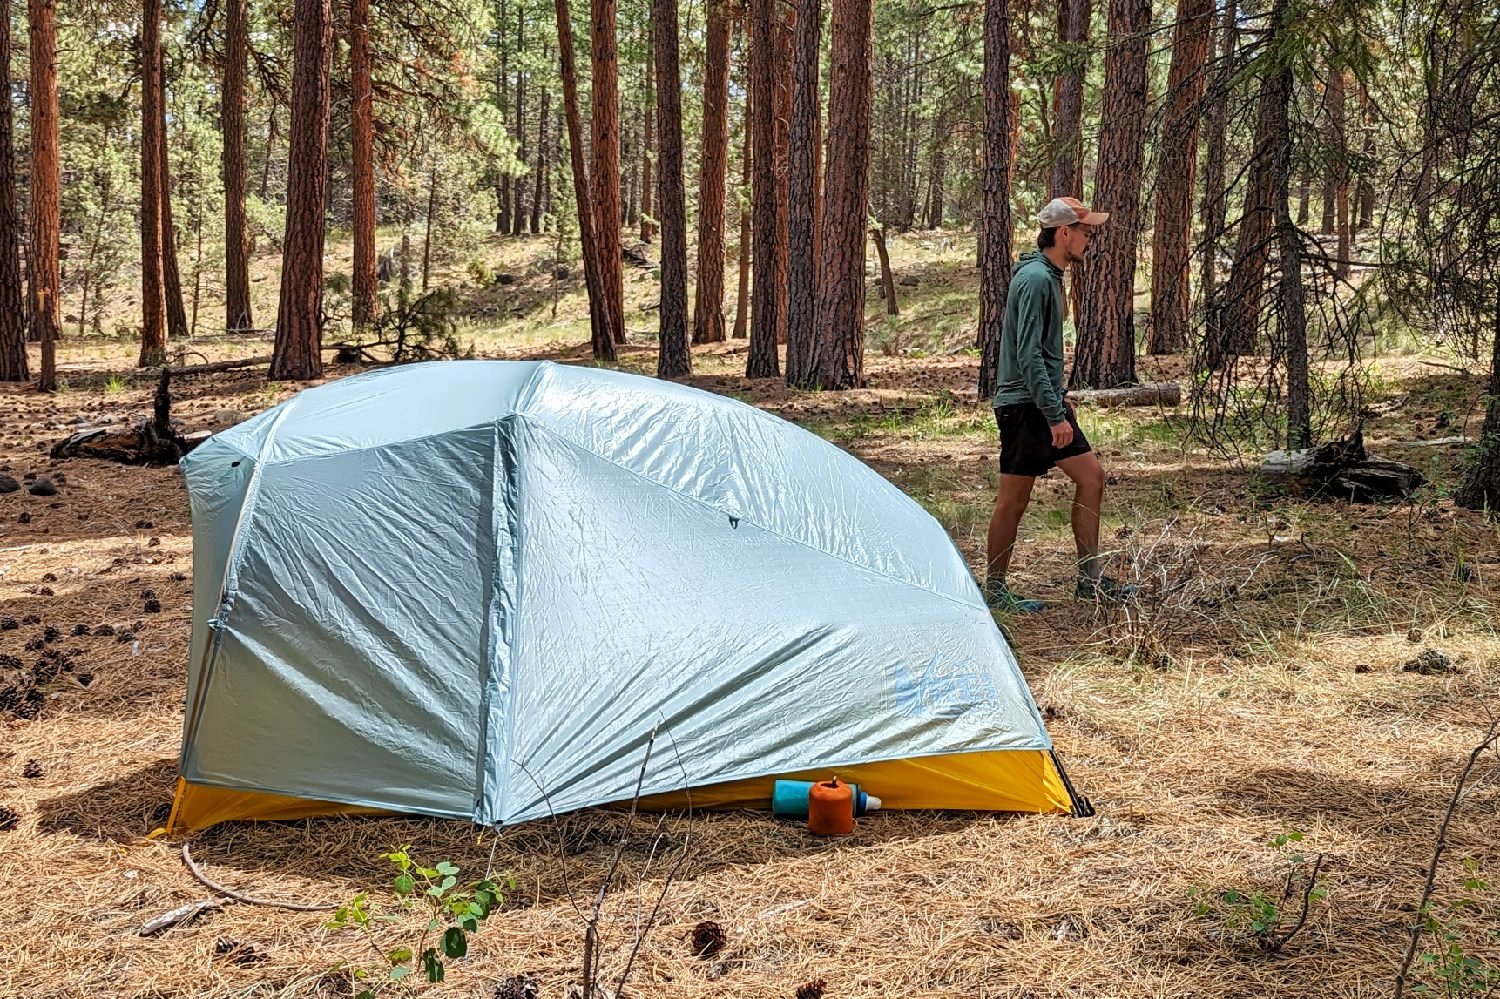 The REI Flash 2 Tent setup with the rainfly on in a forest campsite - a hiker is walking by in the background